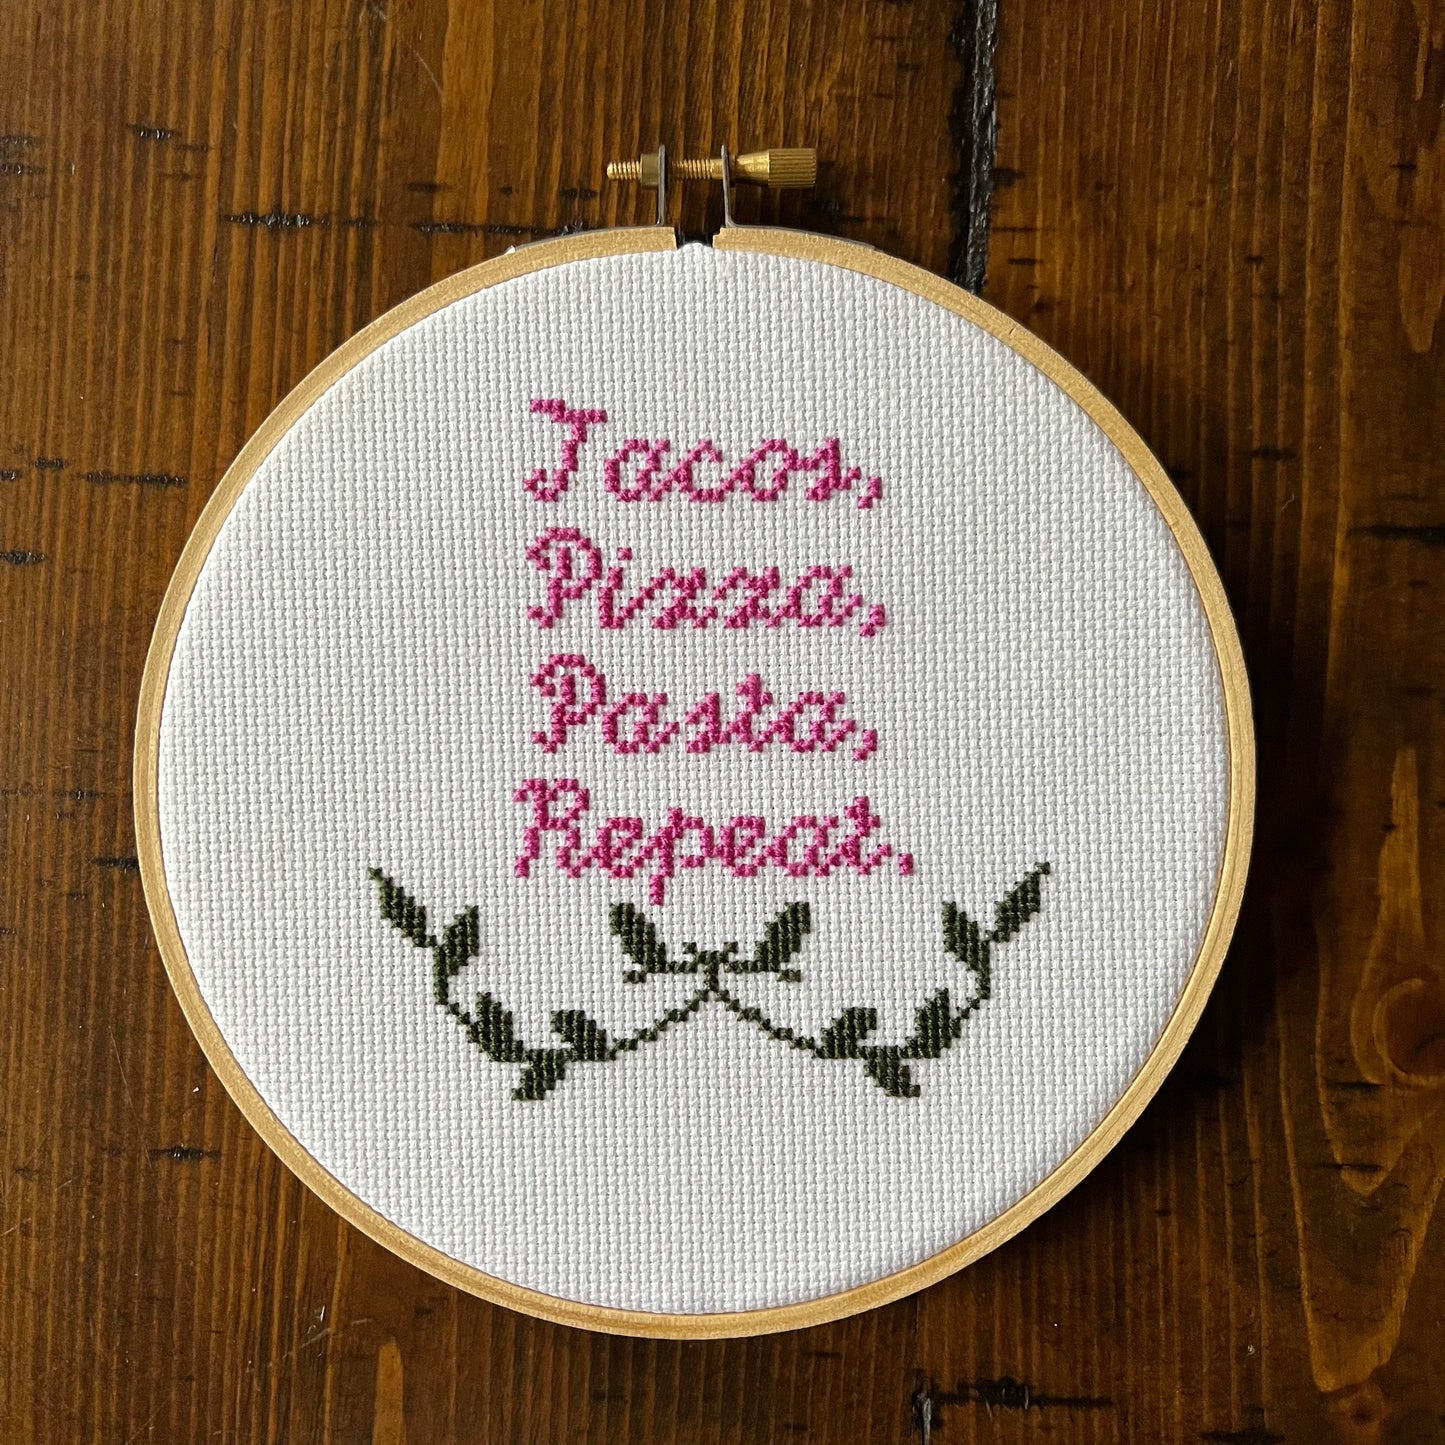 Tacos Pizza Pasta Repeat 6” Hand Stitched Cross Stitch Hoop